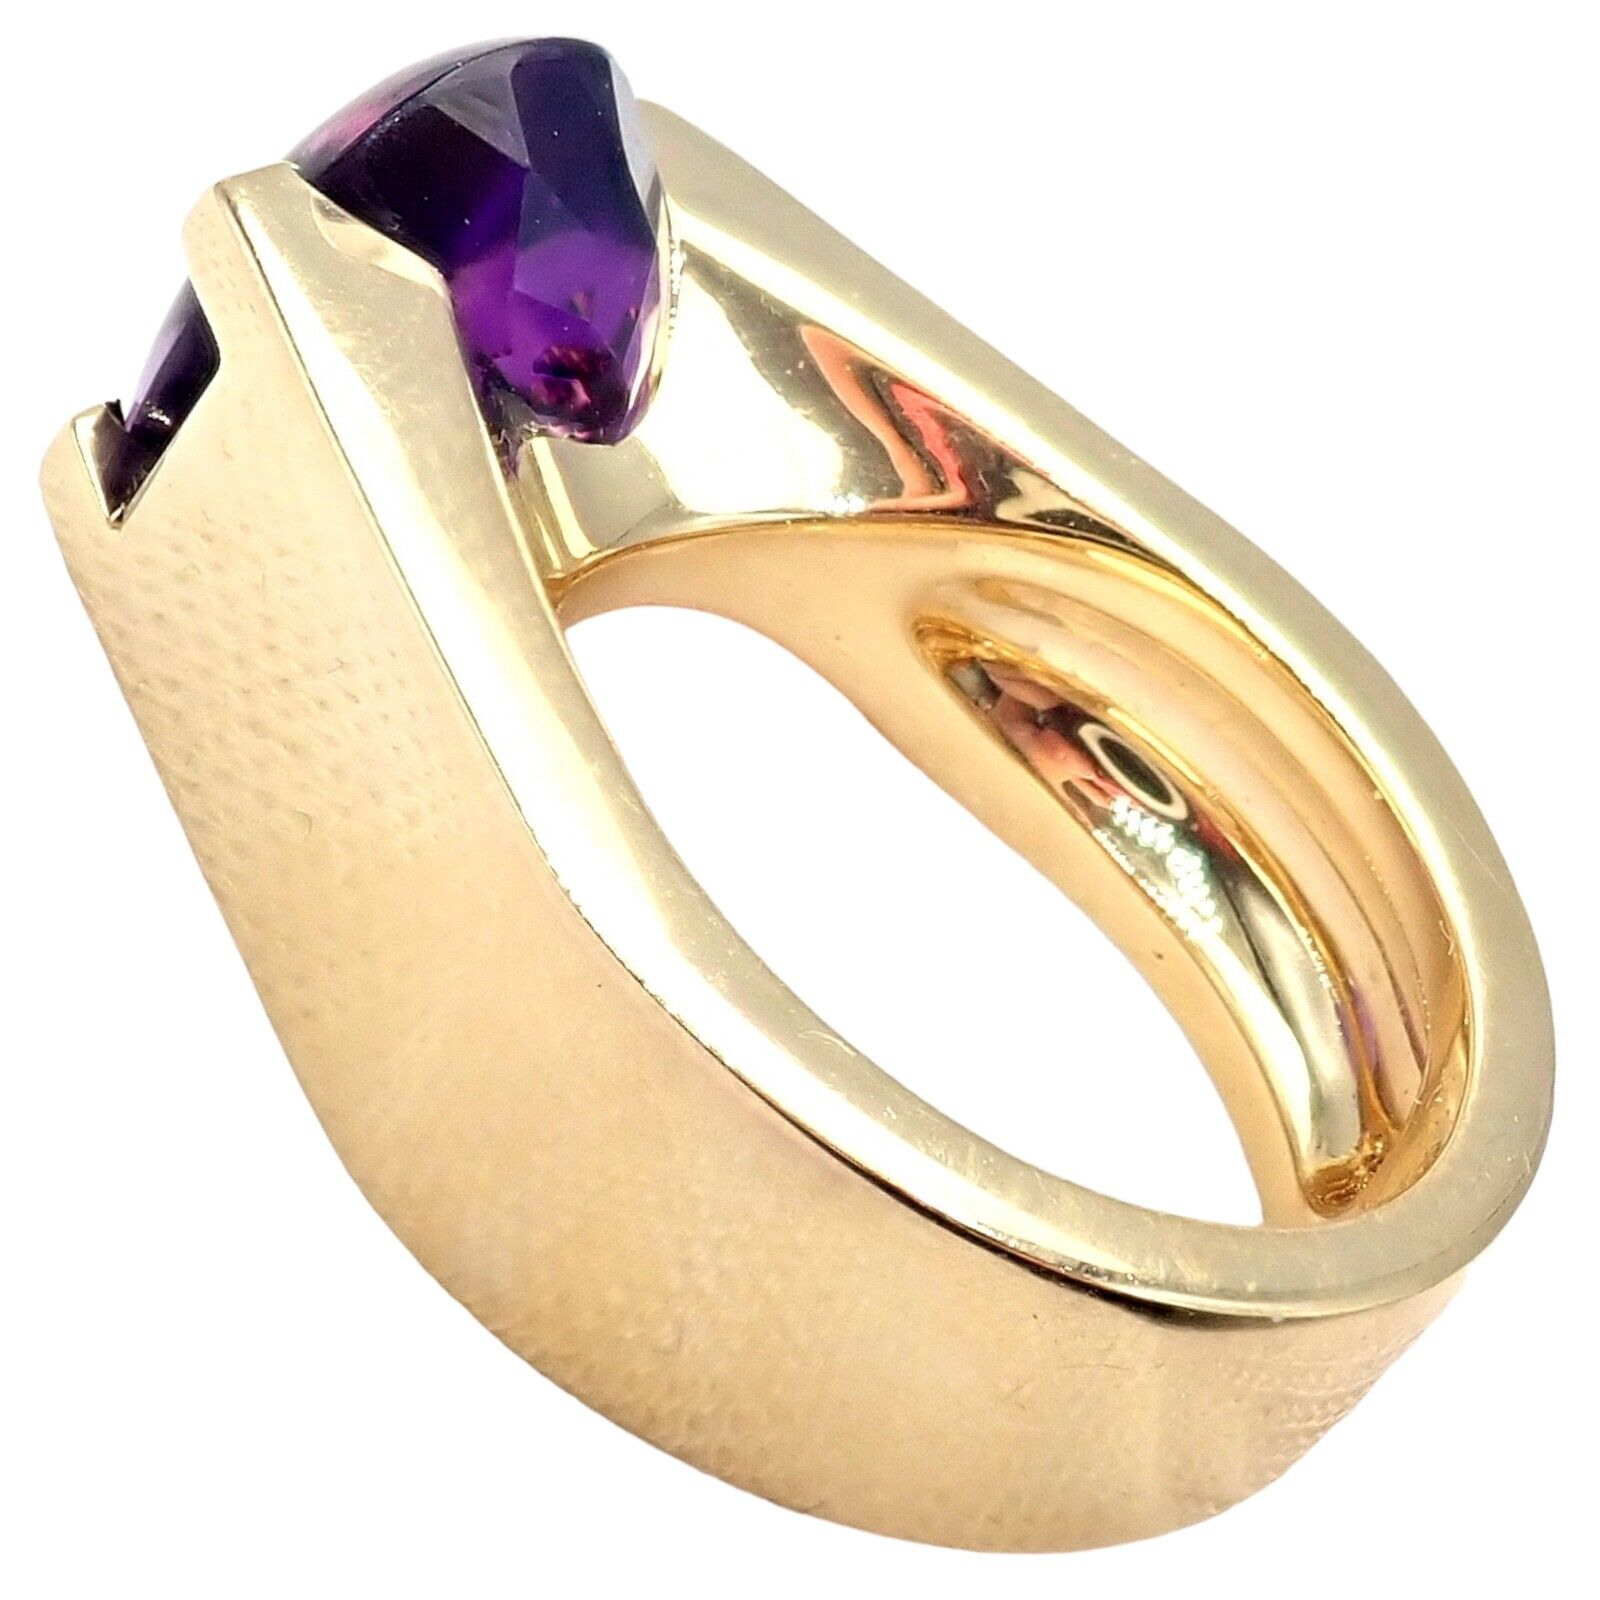 Cartier Jewelry & Watches:Fine Jewelry:Rings Authentic! Cartier Tankissi 18k Yellow Gold Diamond Large Amethyst Ring